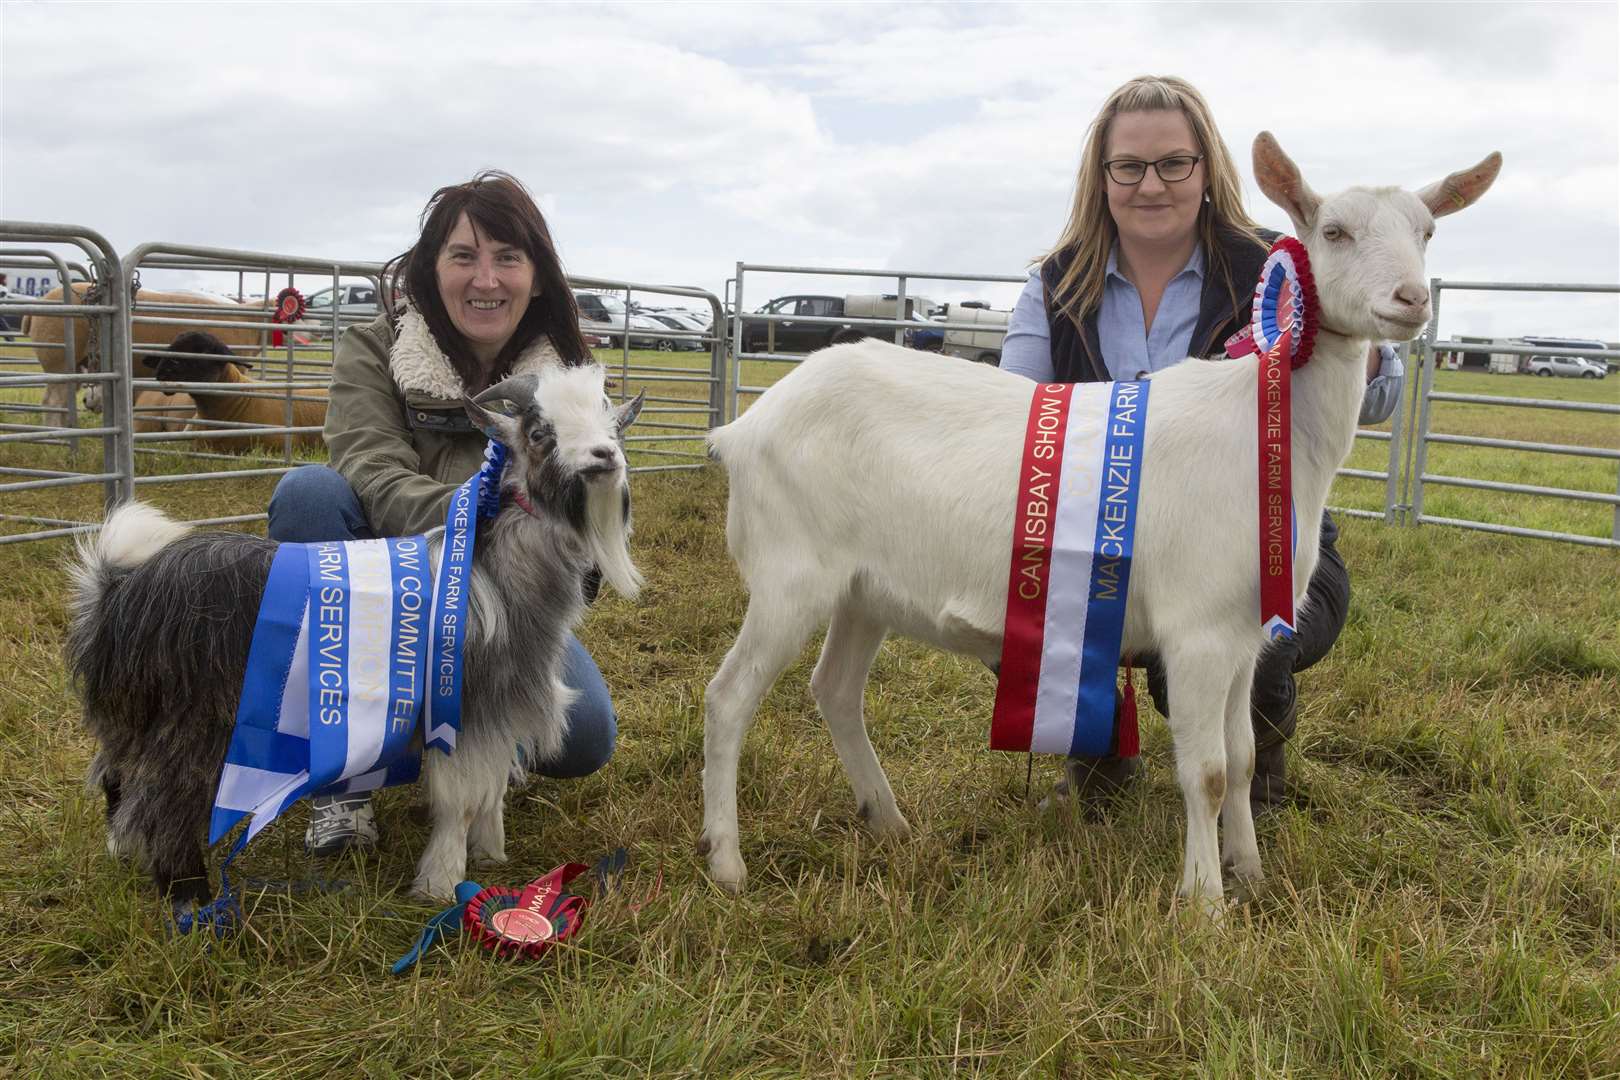 Robbianne Harrold (left), Reiss, with her champion and reserve goats. Janice Ross is holding the champion, Dorothy, a yearling British Saanen goatling, while the reserve was Moorview Snapdragon, a 15-month-old pygmy billy goat. Picture: Robert MacDonald / Northern Studios